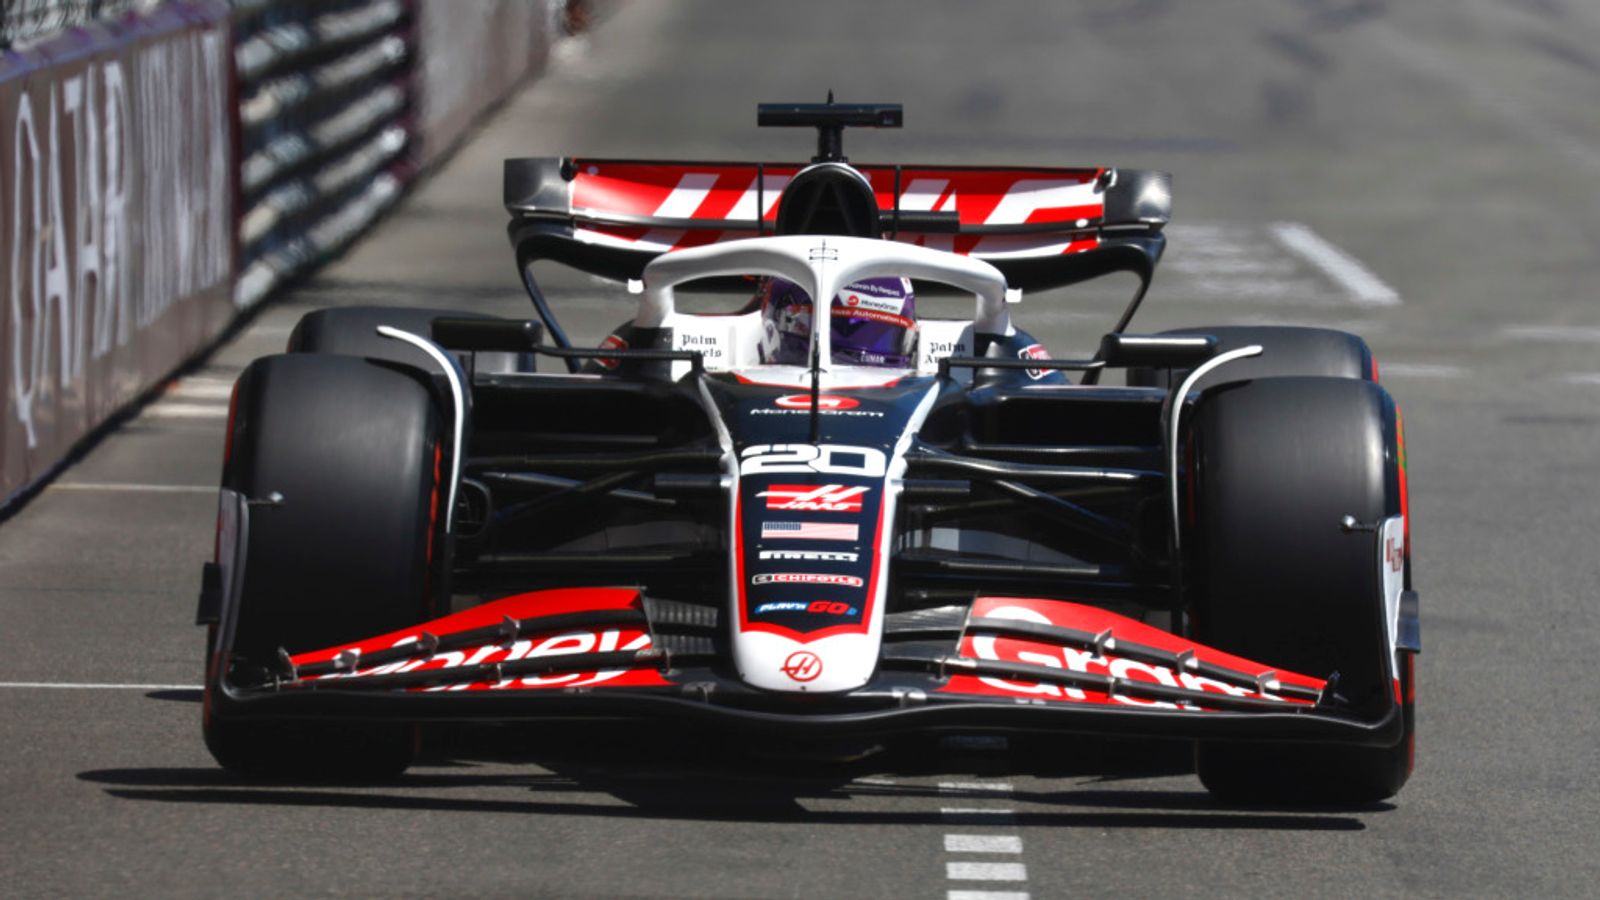 Monaco GP Haas explain disqualification from Qualifying after